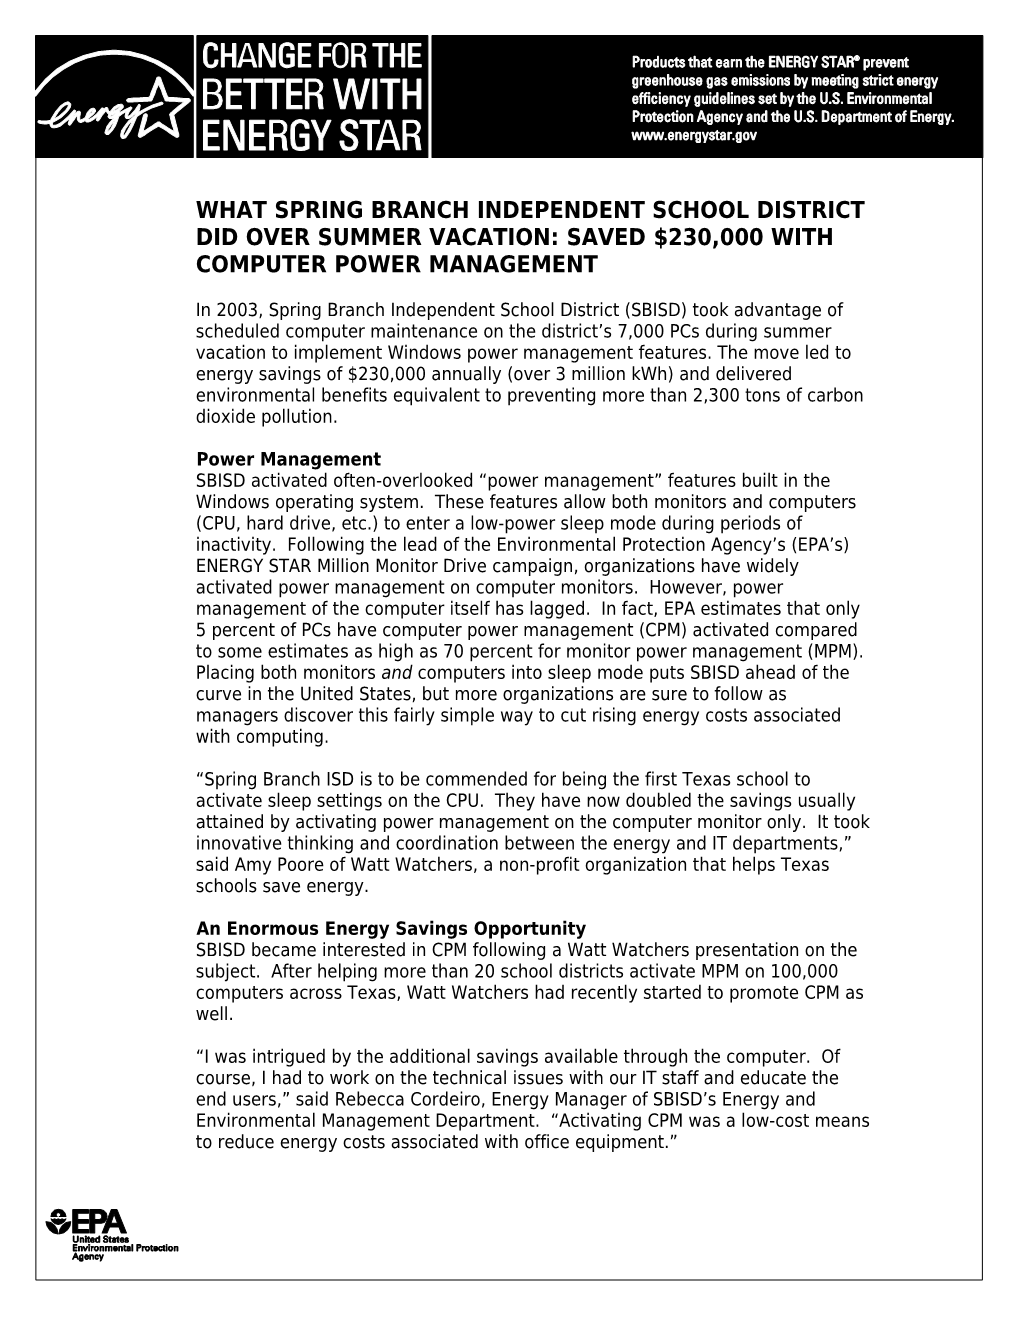 What Spring Branch Independent School District Did Over Summer Vacation: Saved $230,000